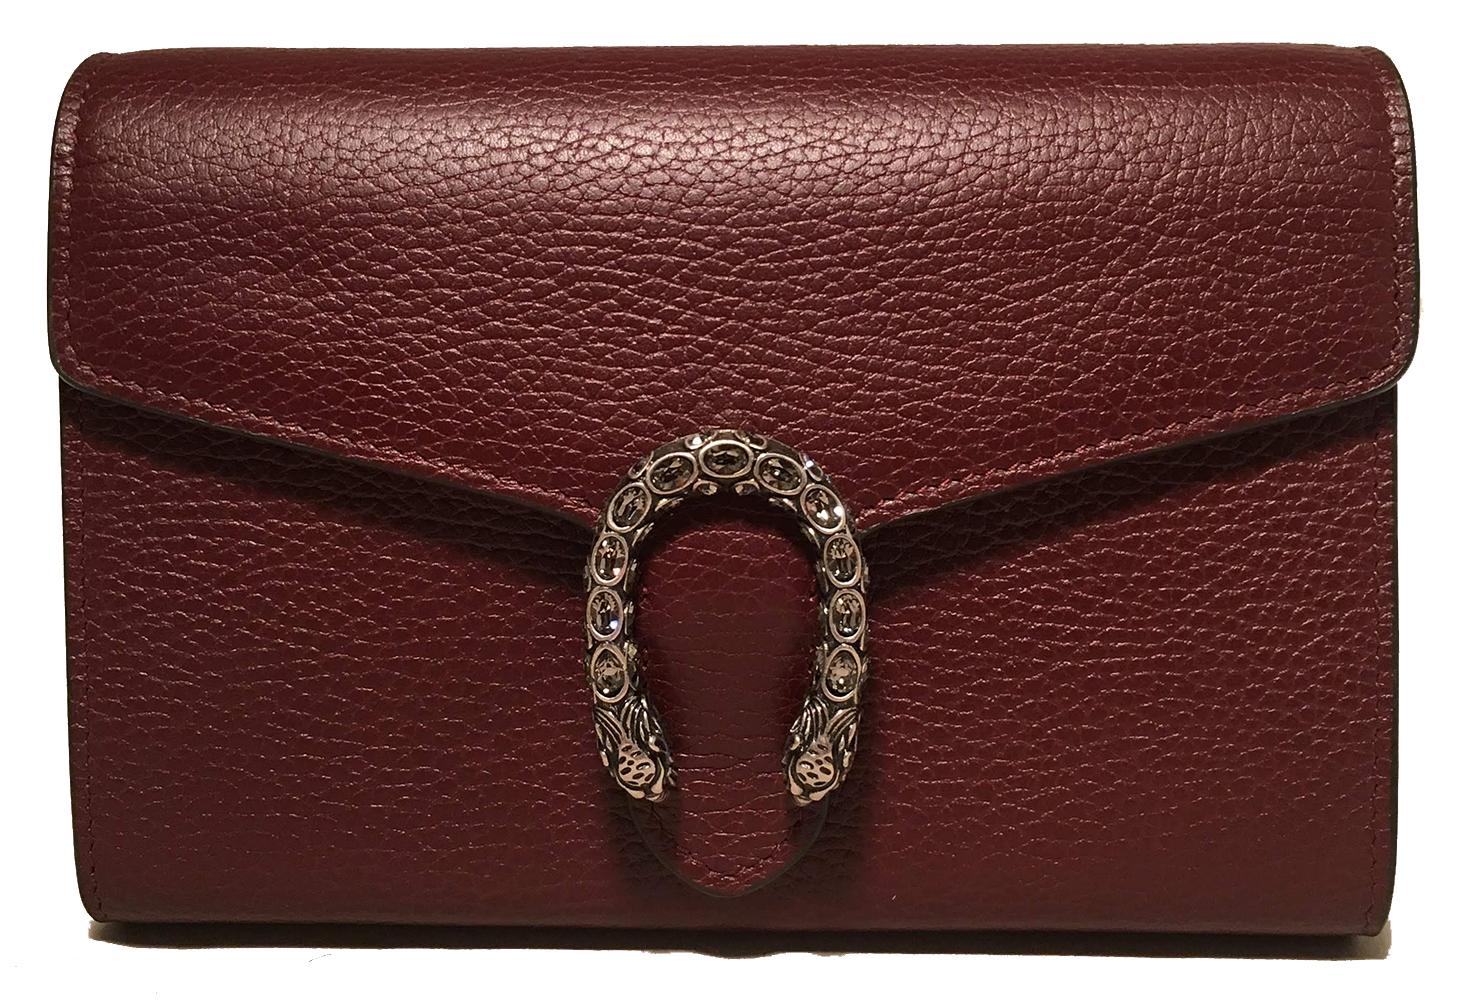 NWOT Gucci Dionysus Maroon Pebbled Leather Mini Chain Serpent Wallet Clutch Bag in like new condition. Maroon pebbled leather exterior trimmed with antiqued silver hardware and an rhinestone embellished snake upon the front flap. Snap flap closure